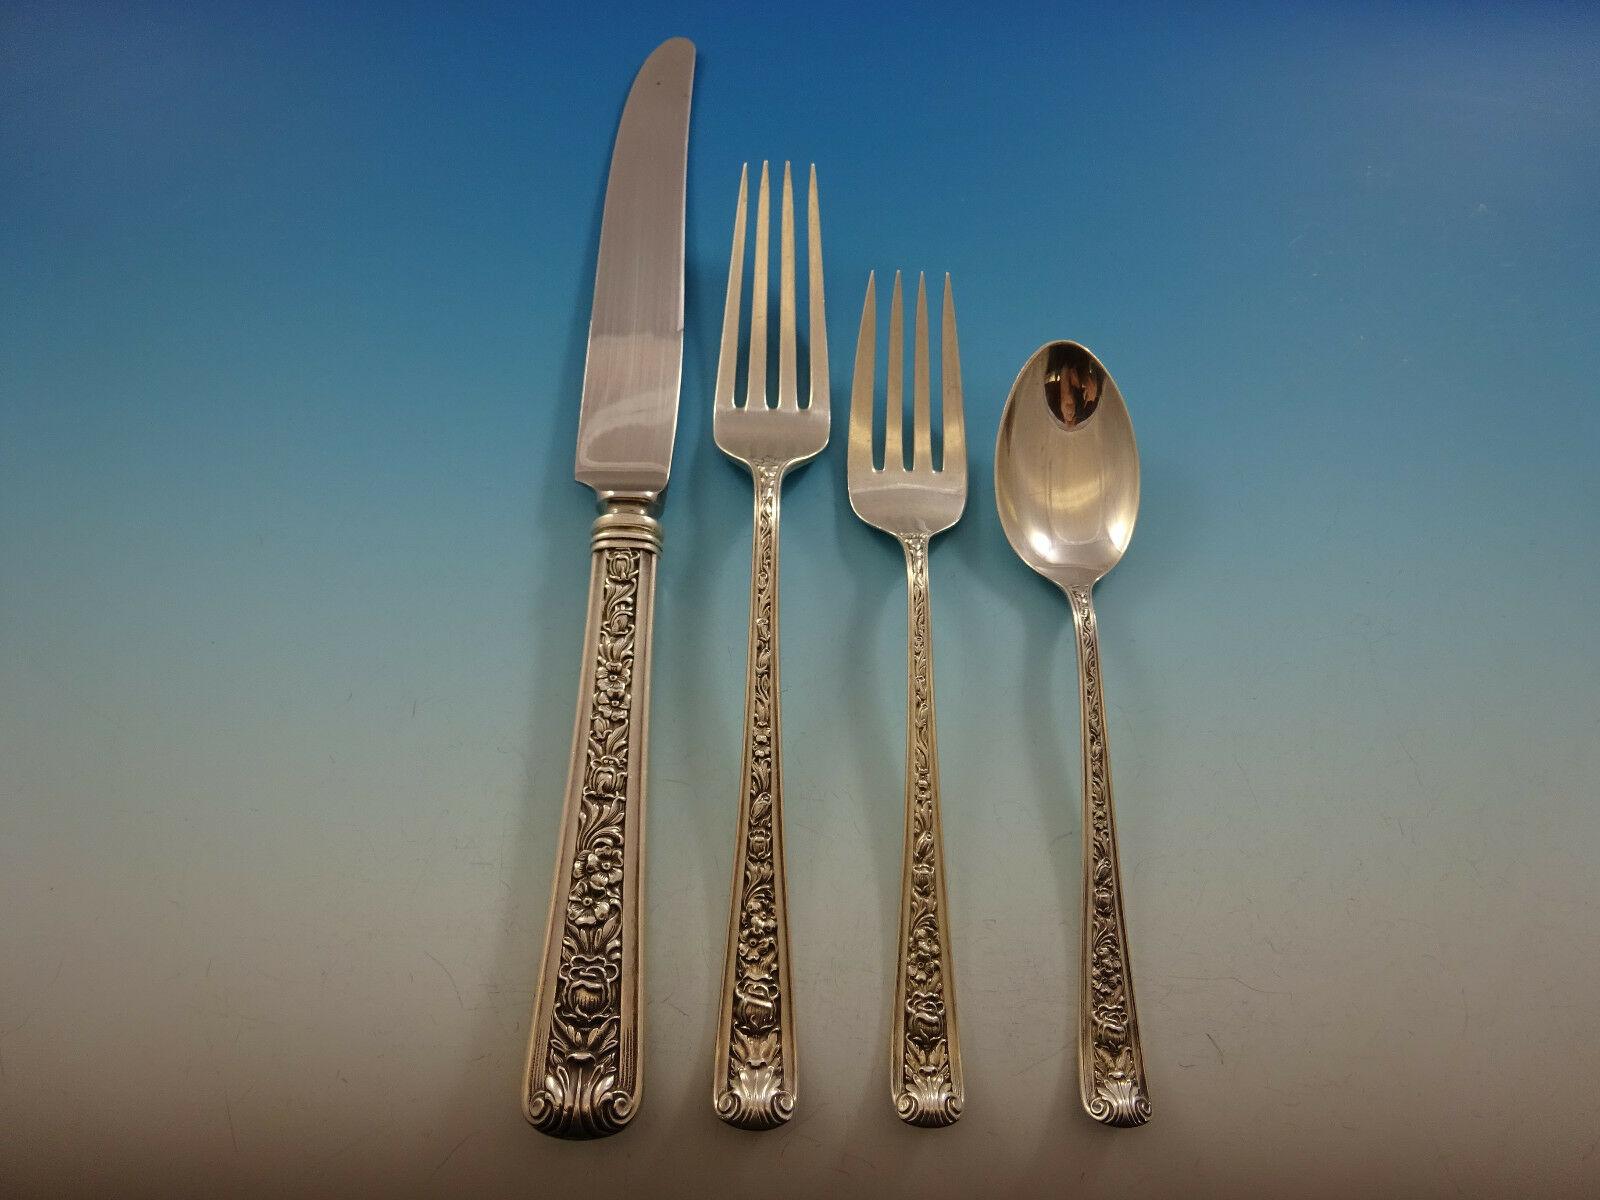 Superb dinner size Windsor rose by Watson sterling silver flatware set - 117 pieces. This set includes:

12 dinner size knives, 10